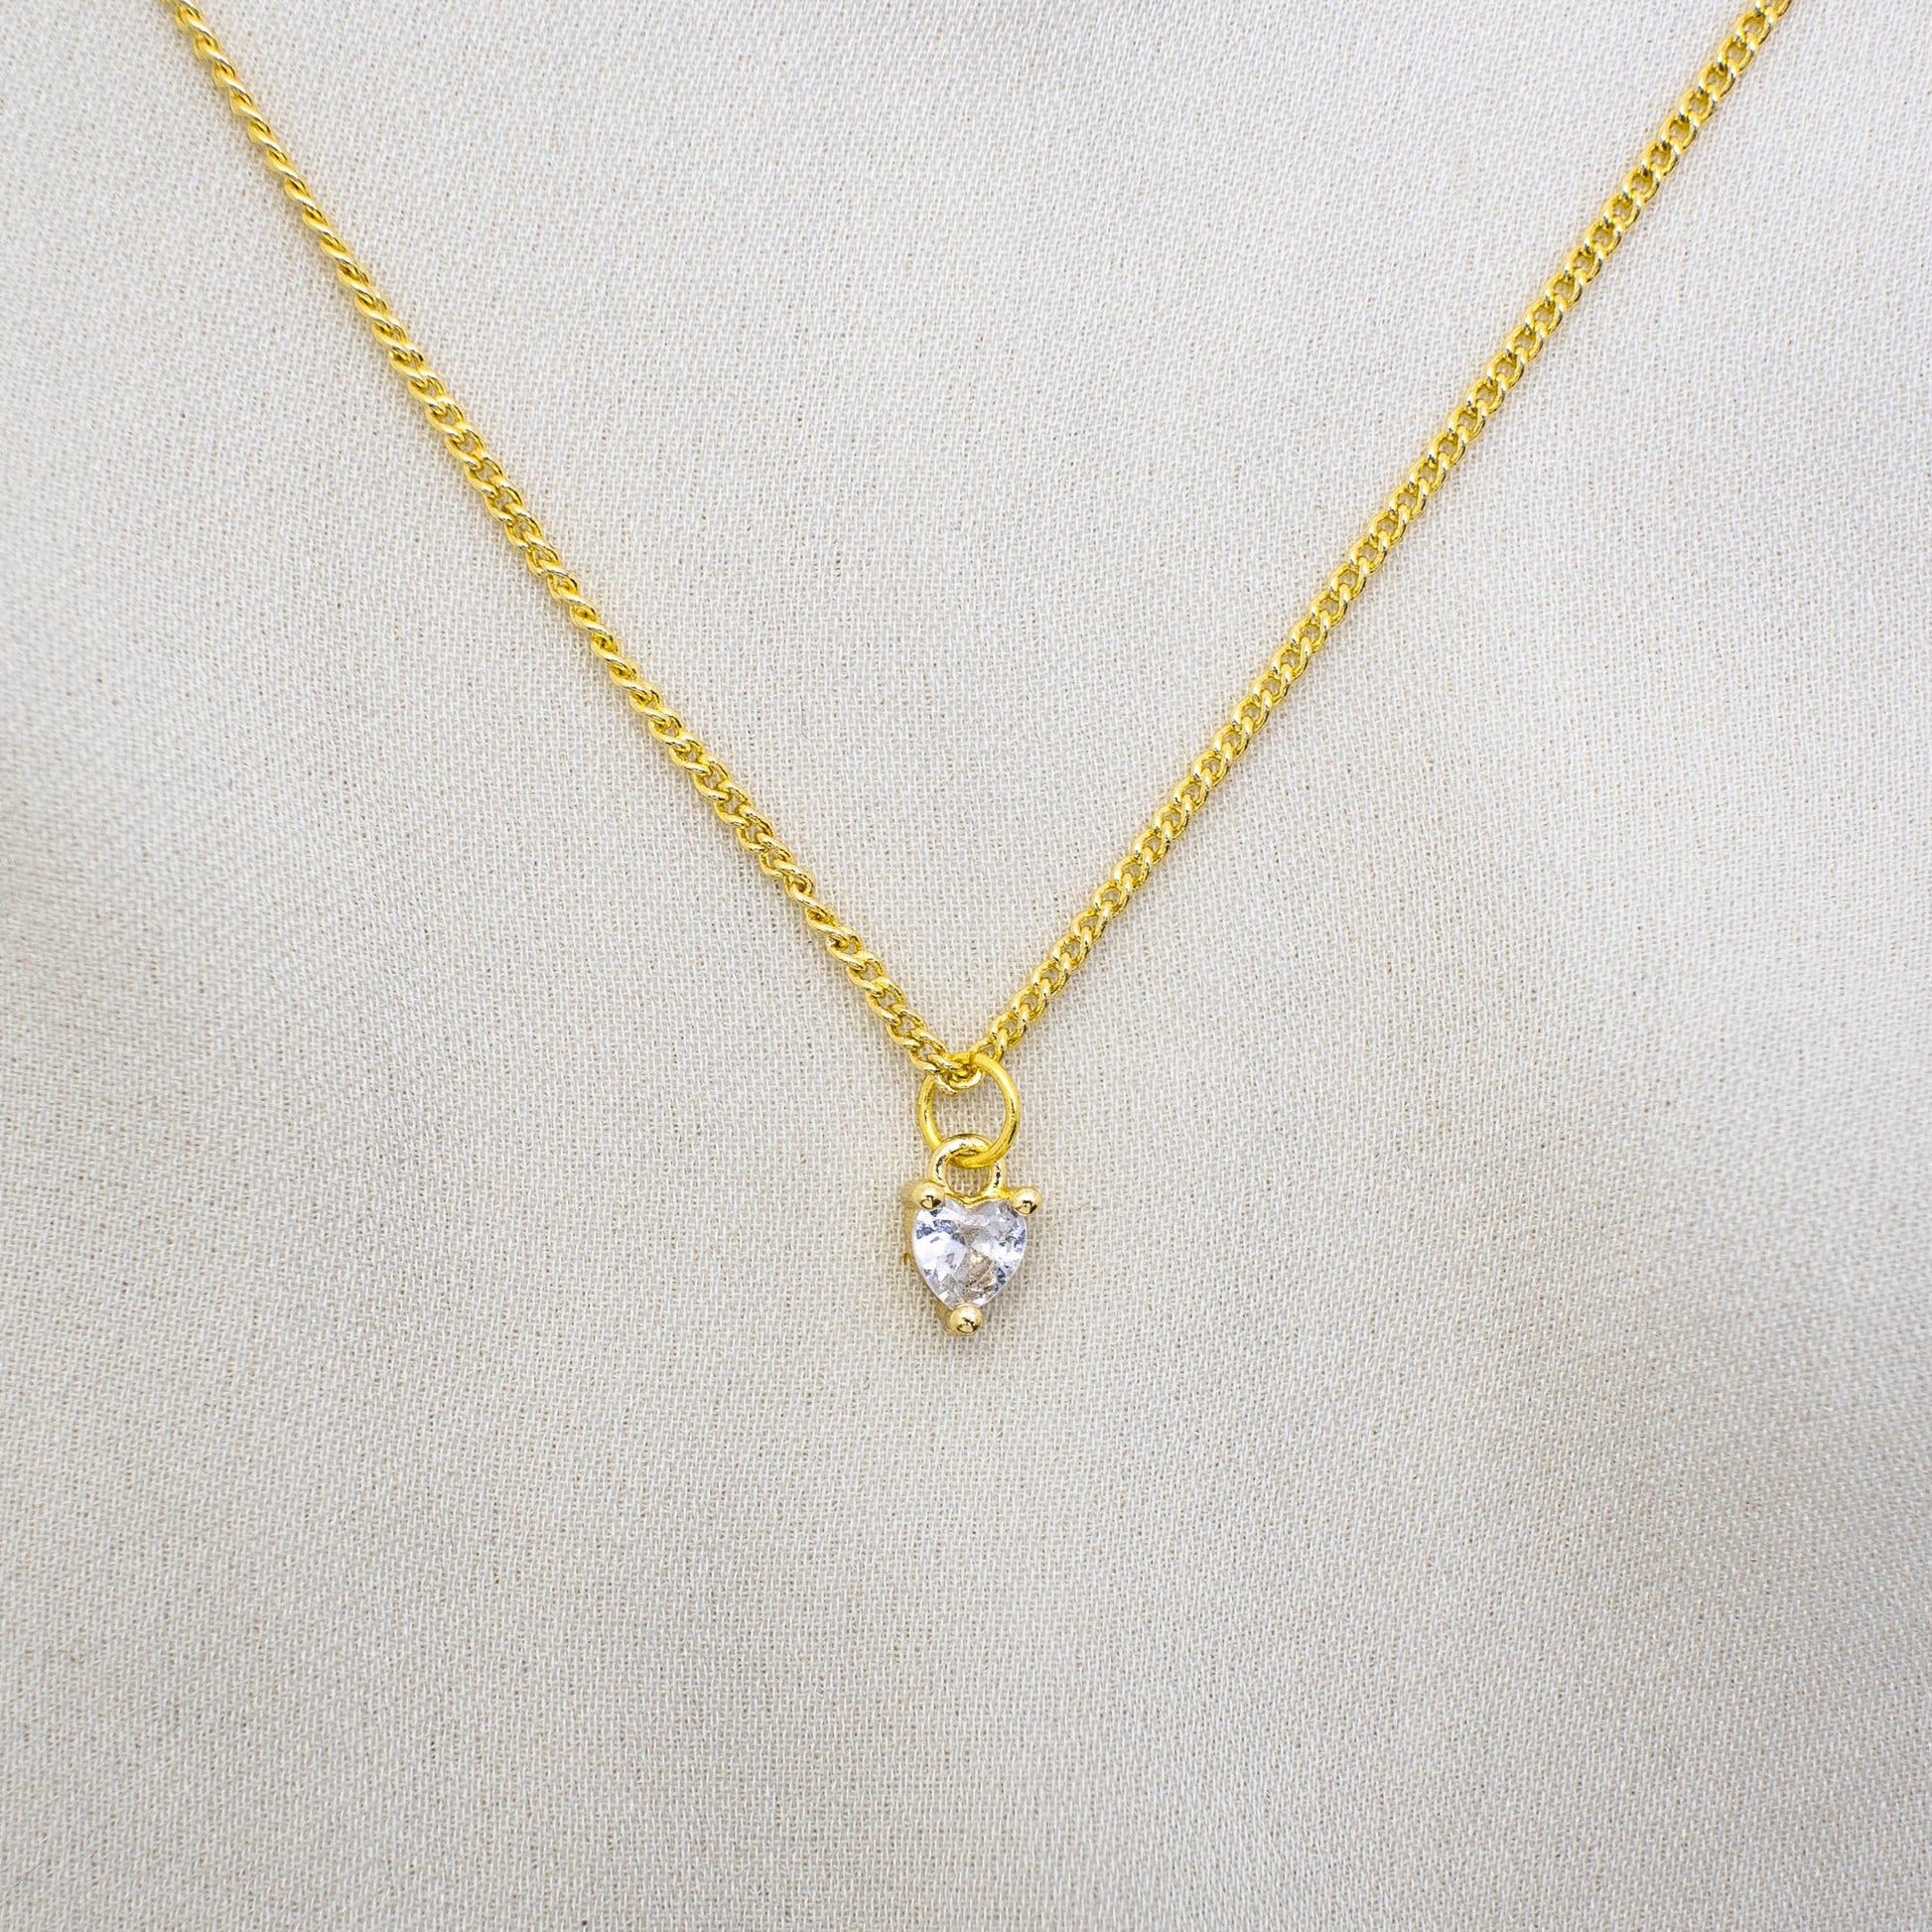 This photo features a thin chain necklace made of 14K gold-plated sterling silver, paired with a mini zirconia heart charm.